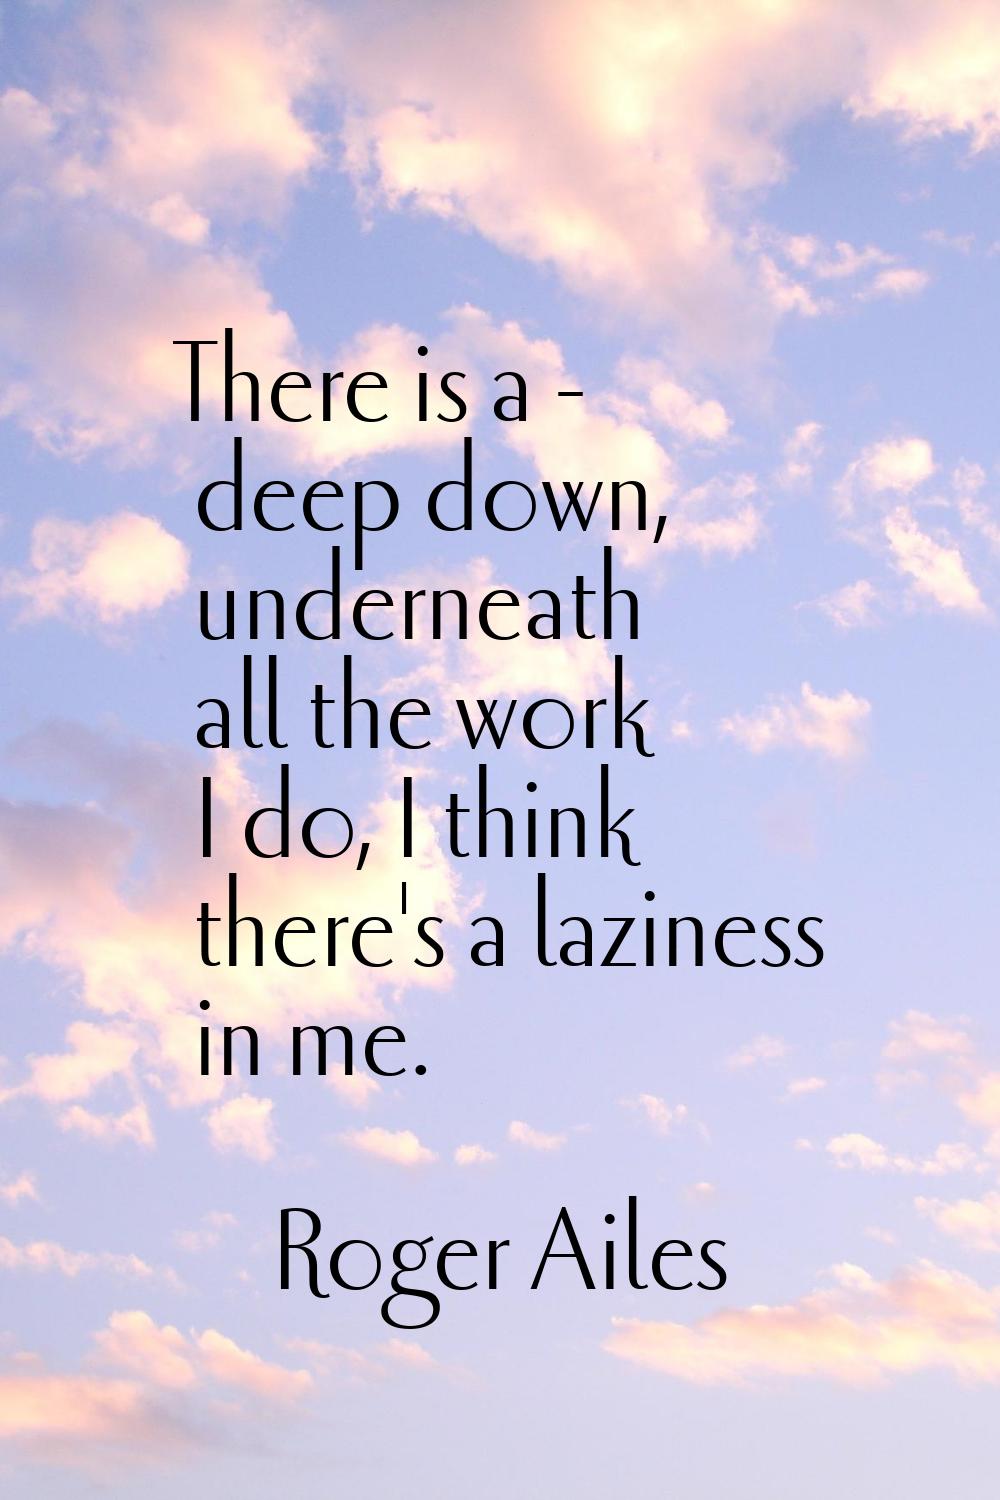 There is a - deep down, underneath all the work I do, I think there's a laziness in me.